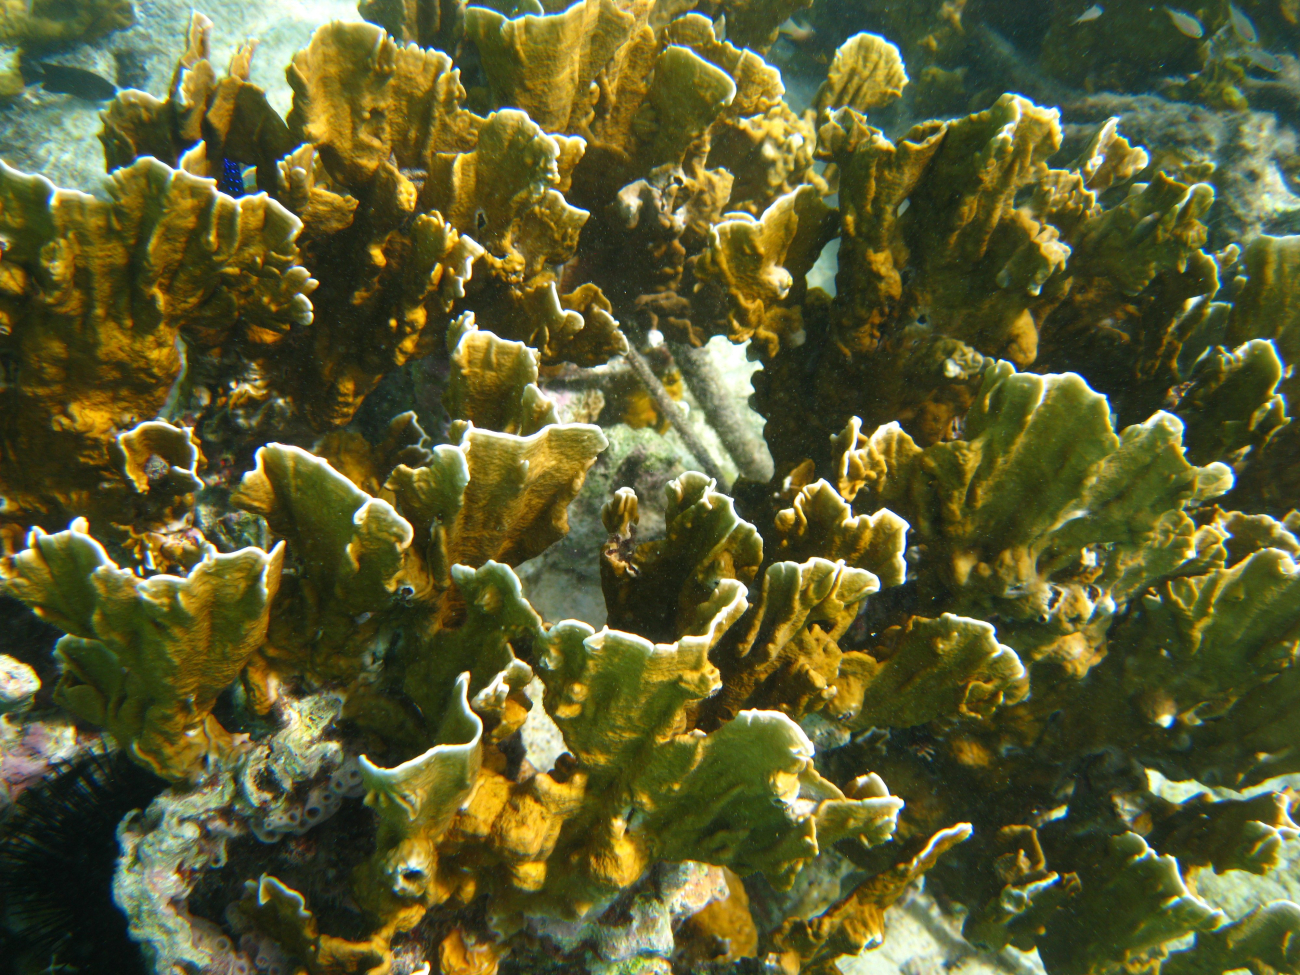 Fire coral, Millepora complanata, is frequently found in the waters surroundingBonaire, particularly close to shore